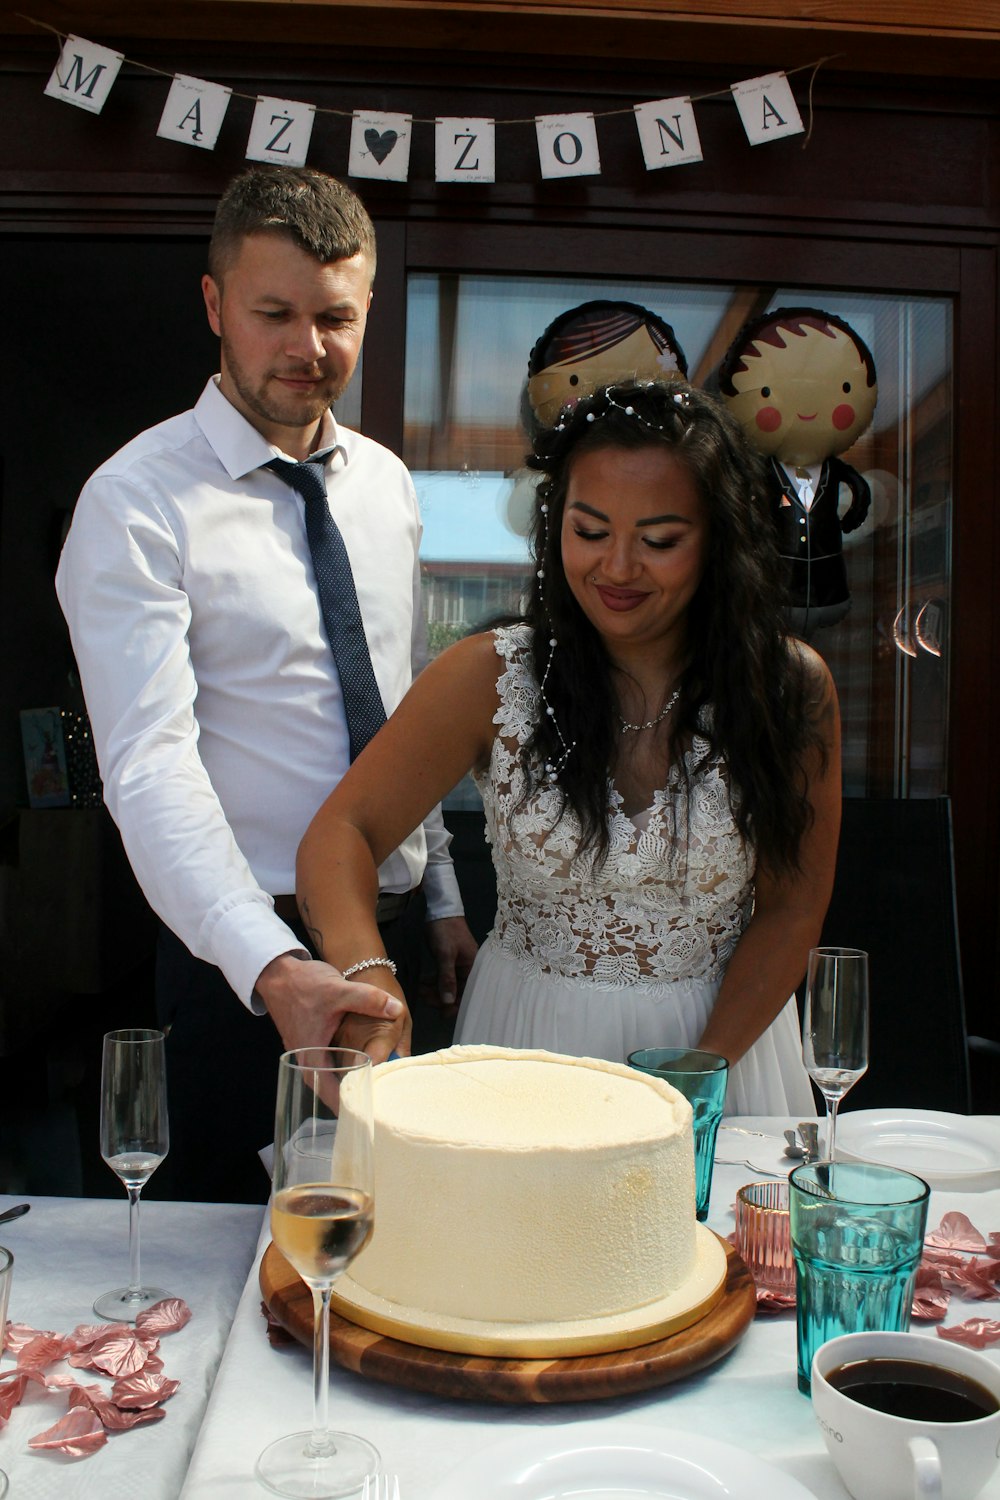 a man and a woman cutting a cake together